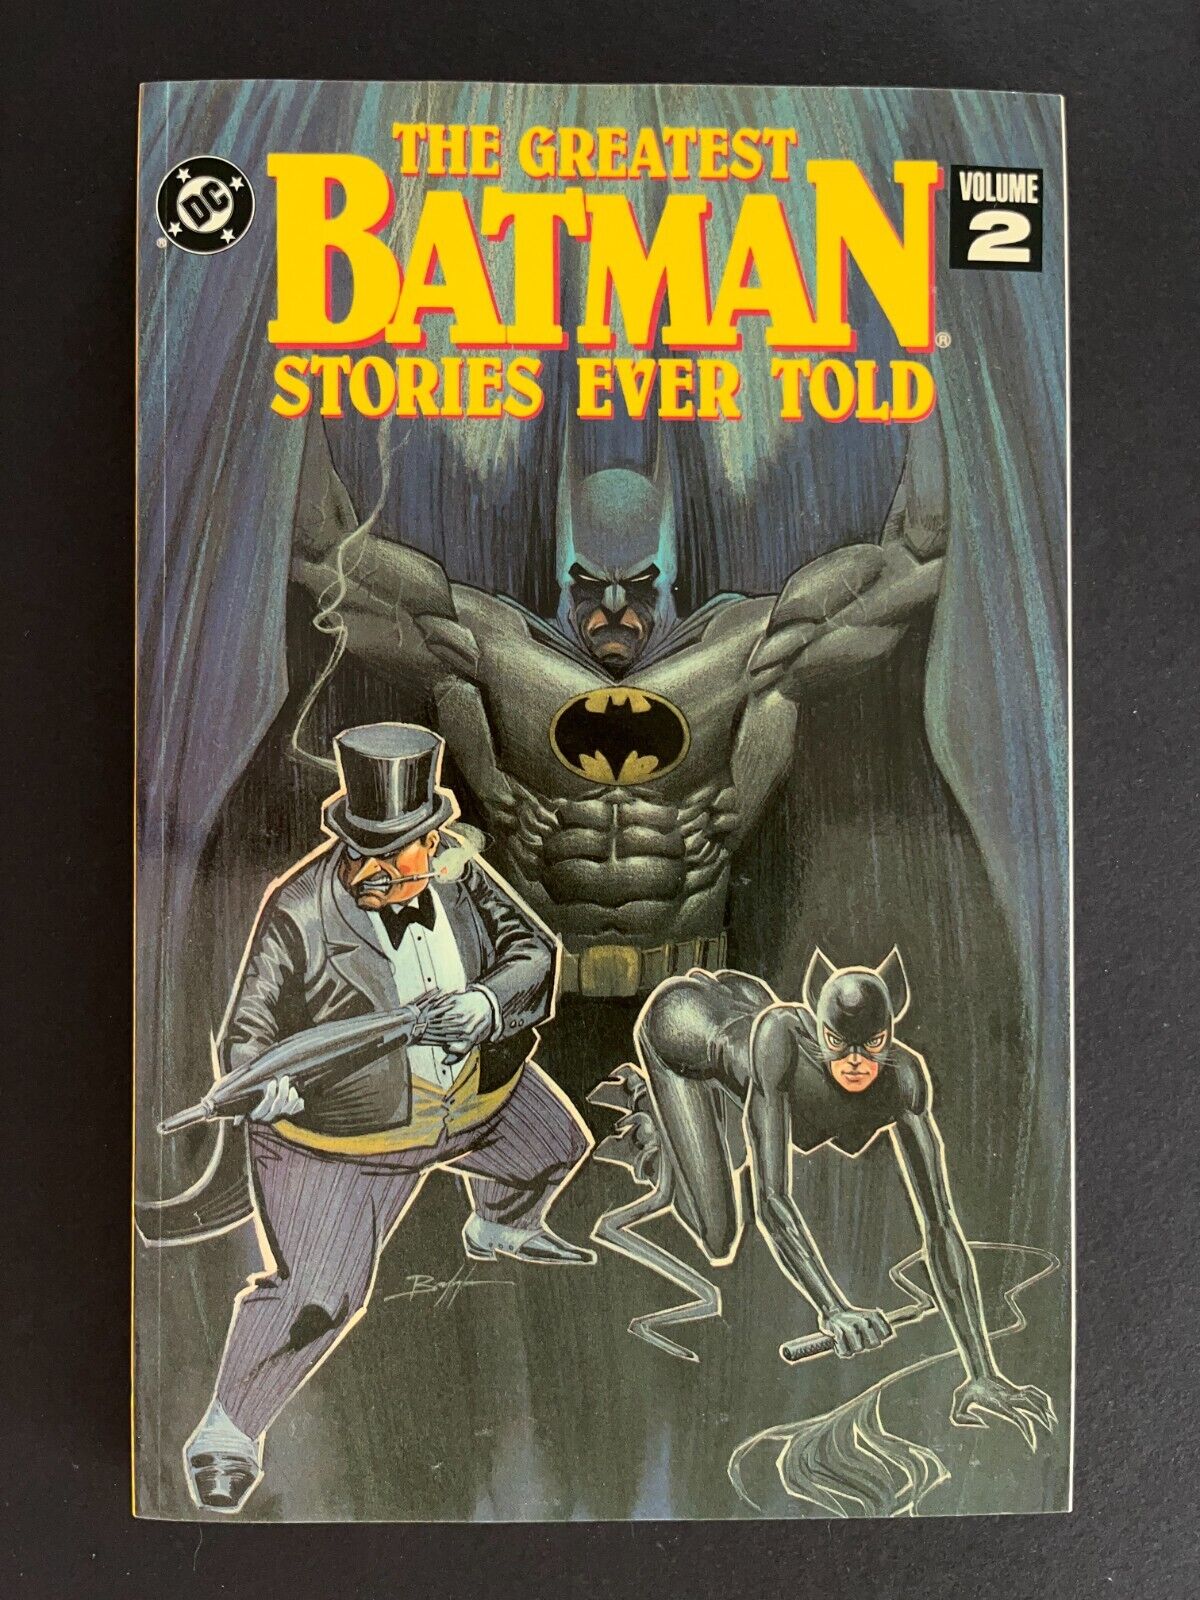 The Greatest Batman Stories Ever Told vol. 2 (DC, 1992, Softcover, 1st Edition)